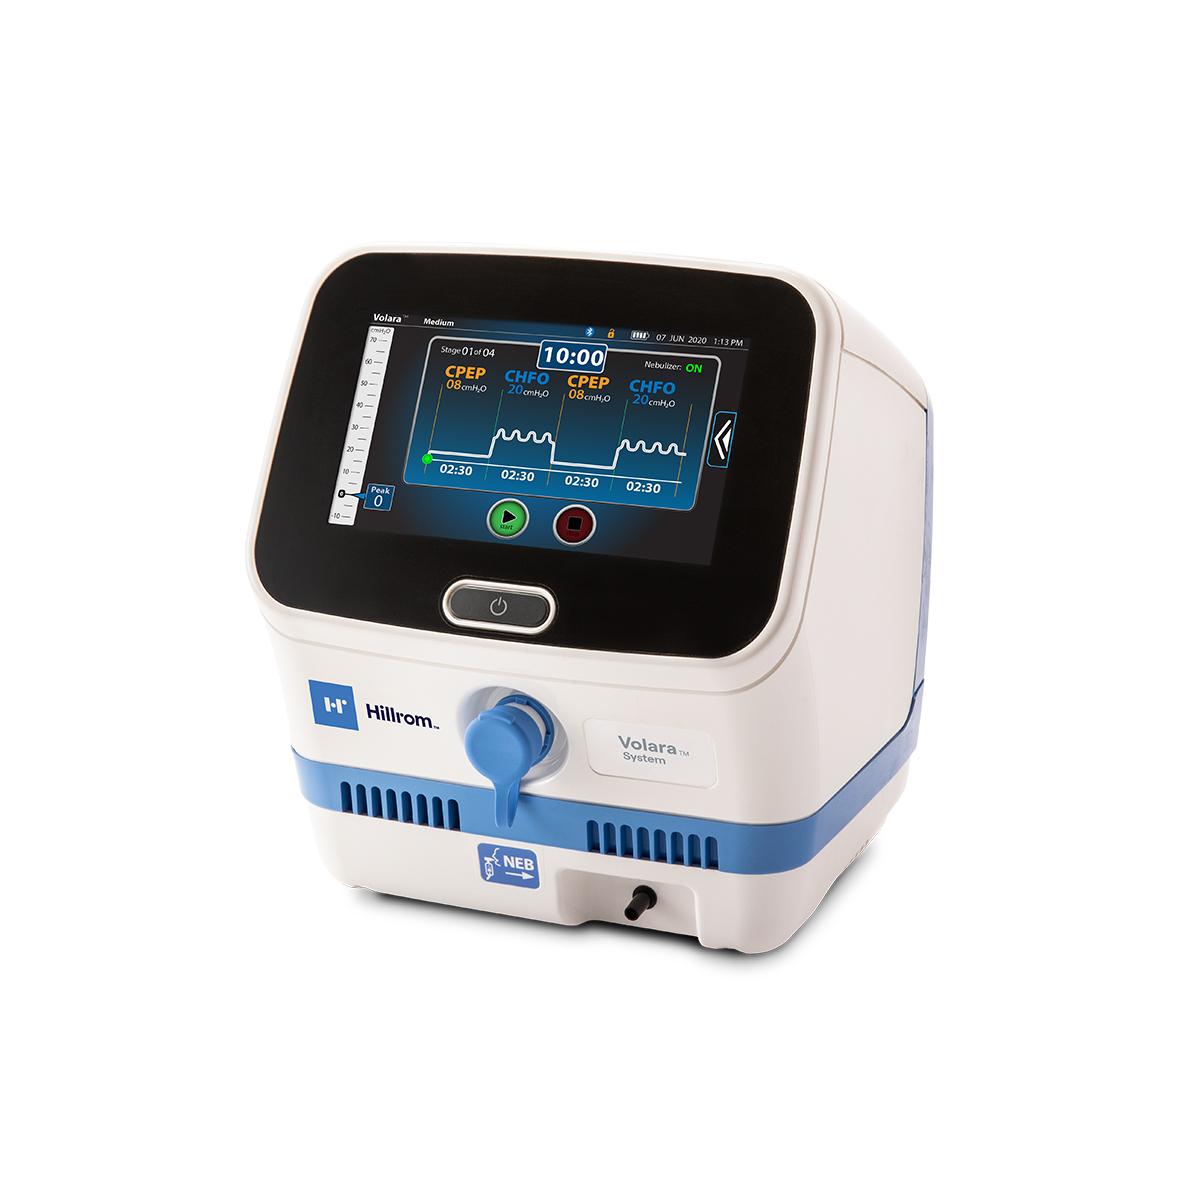 The Hillrom™ Volara Oscillation and Lung Expansion Therapy system's controller unit, in white-and-blue trim.